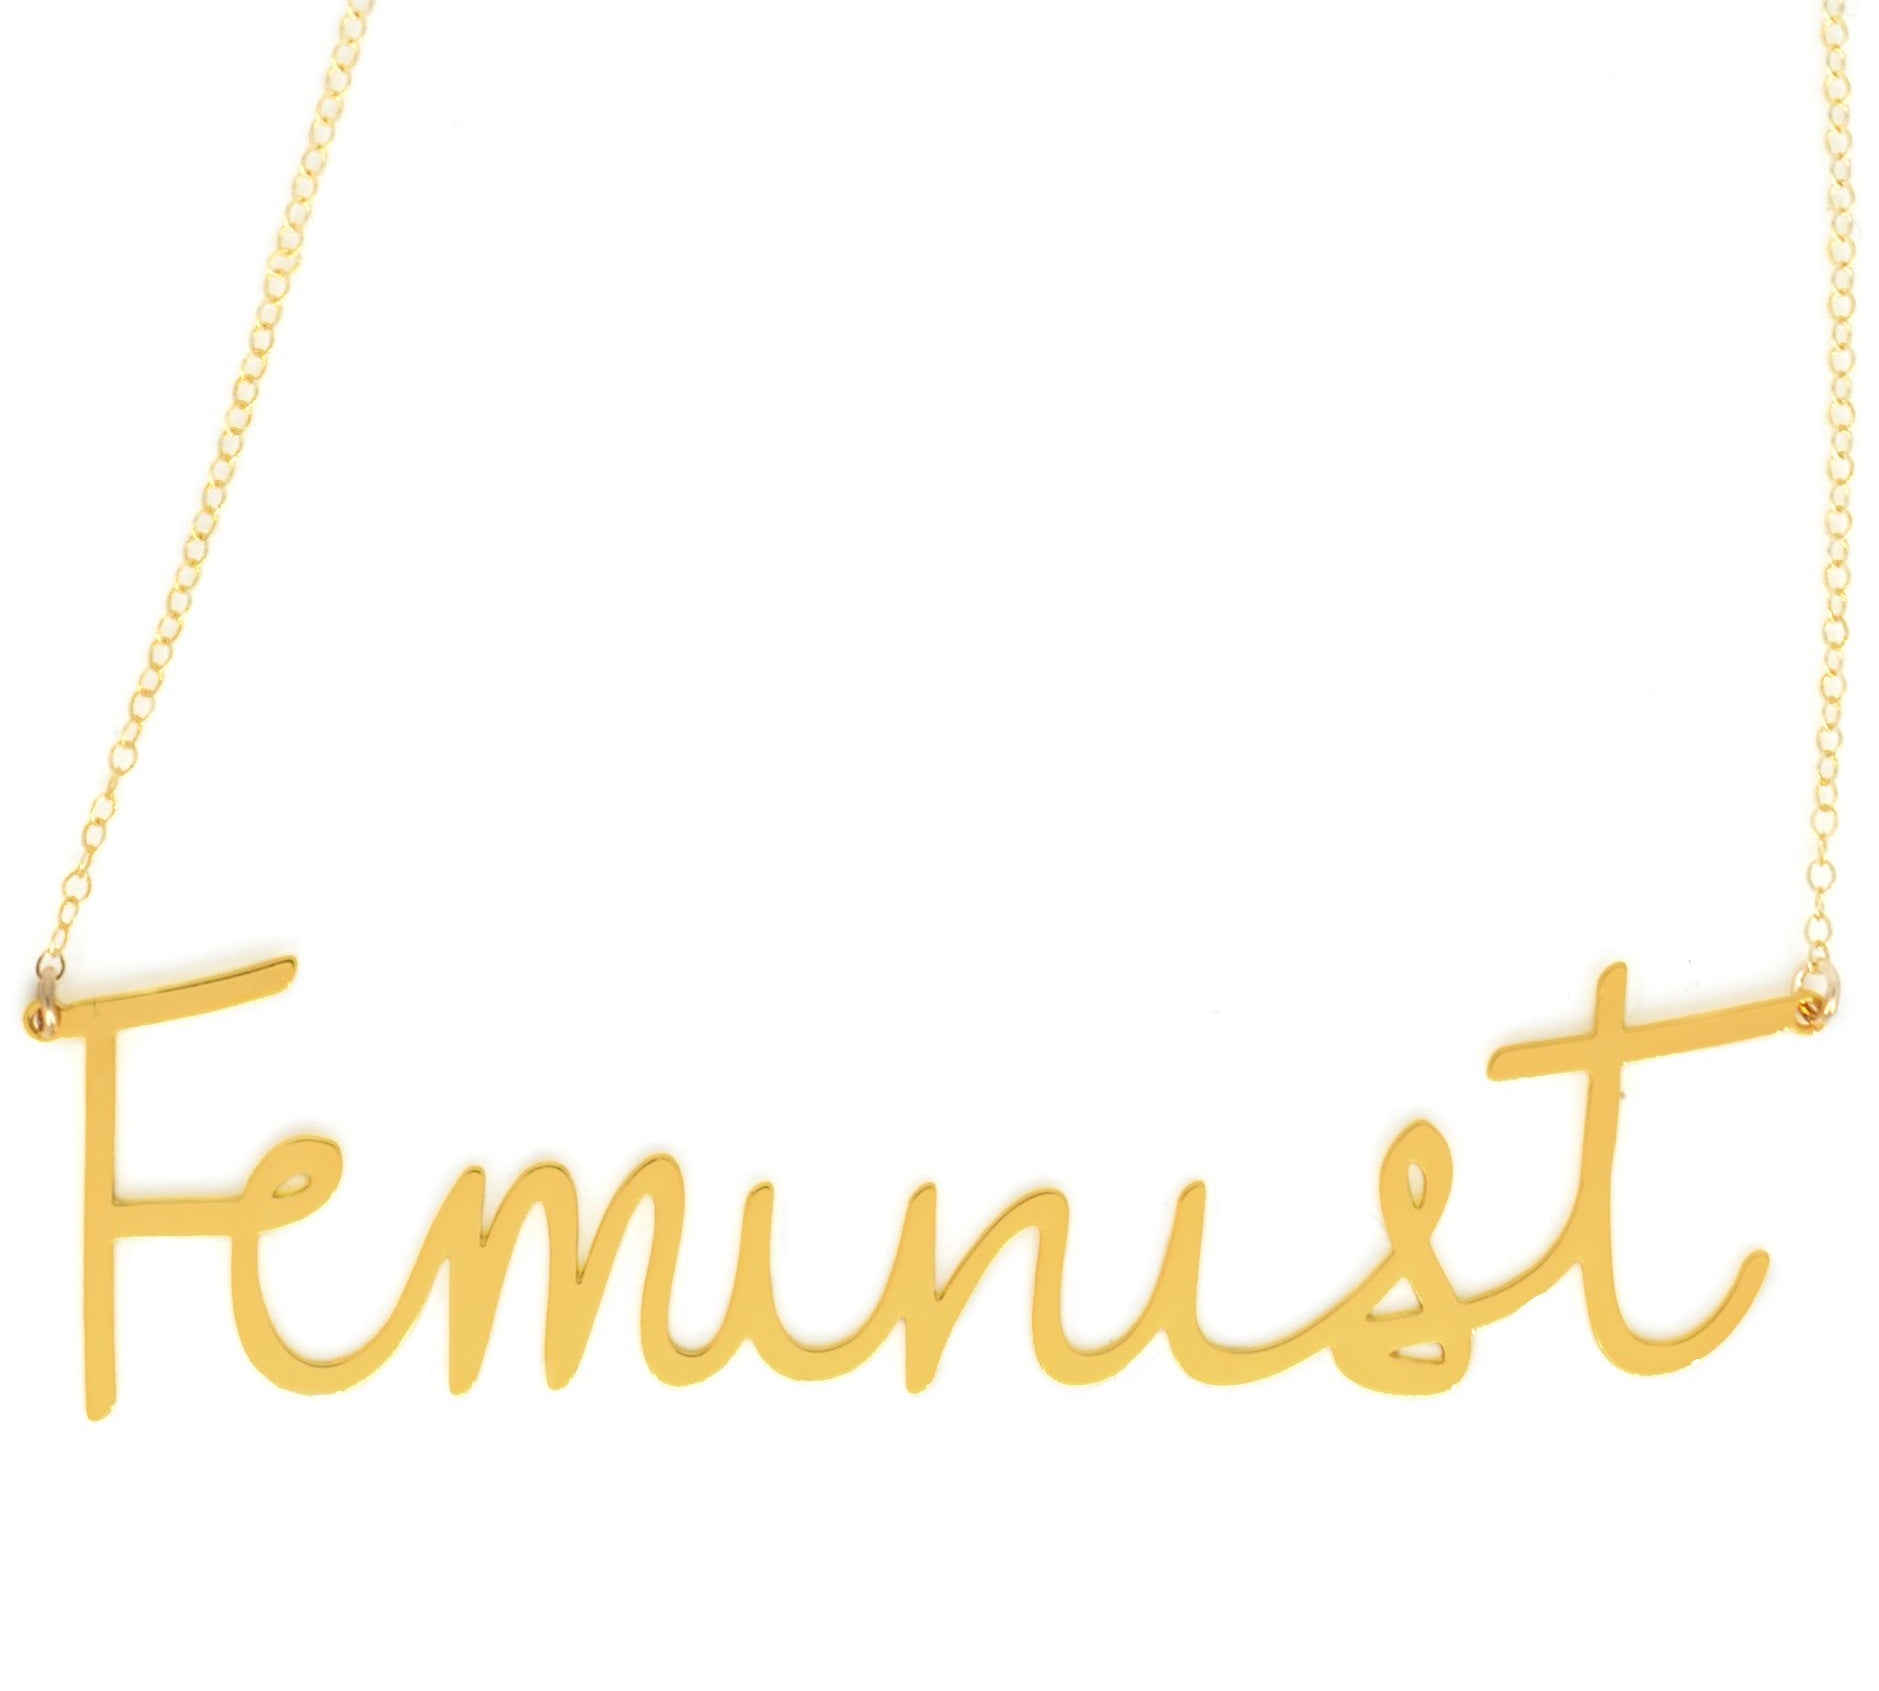 Feminist Necklace - High Quality, Affordable, Hand Written, Empowering, Self Love, Mantra Word Necklace - Available in Gold and Silver - Small and Large Sizes - Made in USA - Brevity Jewelry